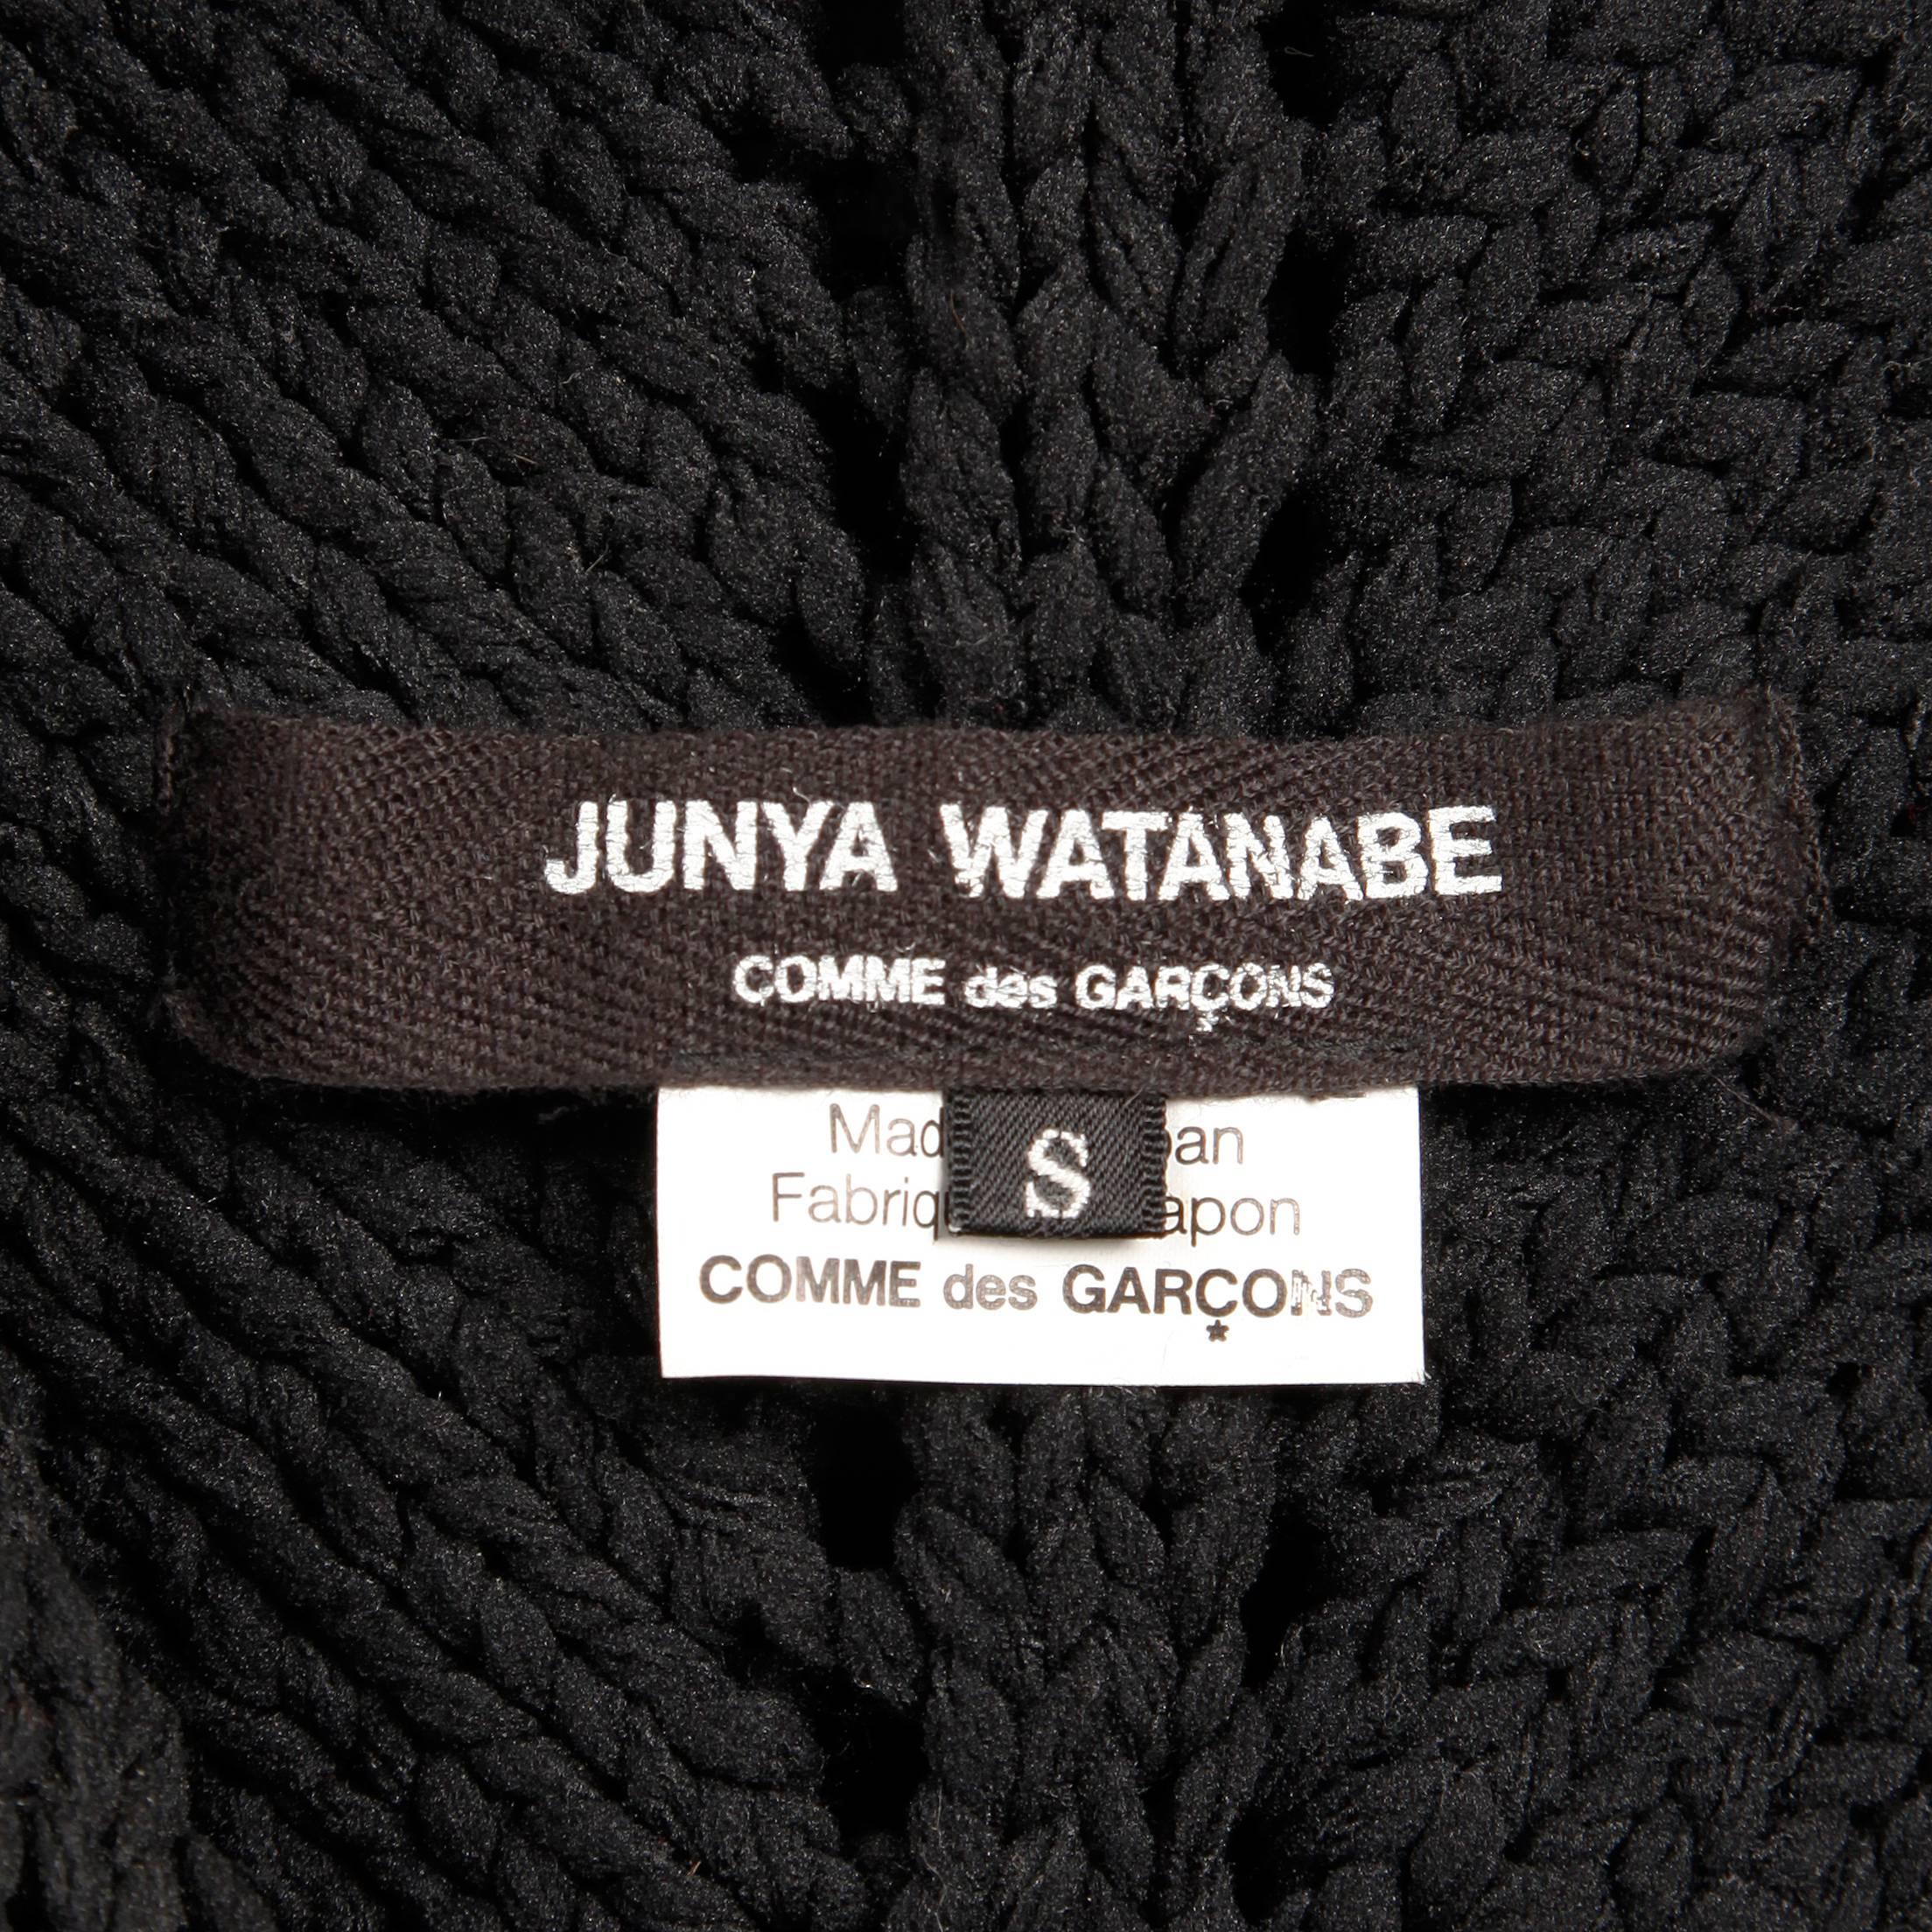 Amazing Junya Watanbe for Comme des Garcons black wool knit sweater top. Unlined with no closure (pulls on over head). The marked size is small. Stretchy black fabric is not faded (we lightened the photos to show detail). Excellent vintage condition